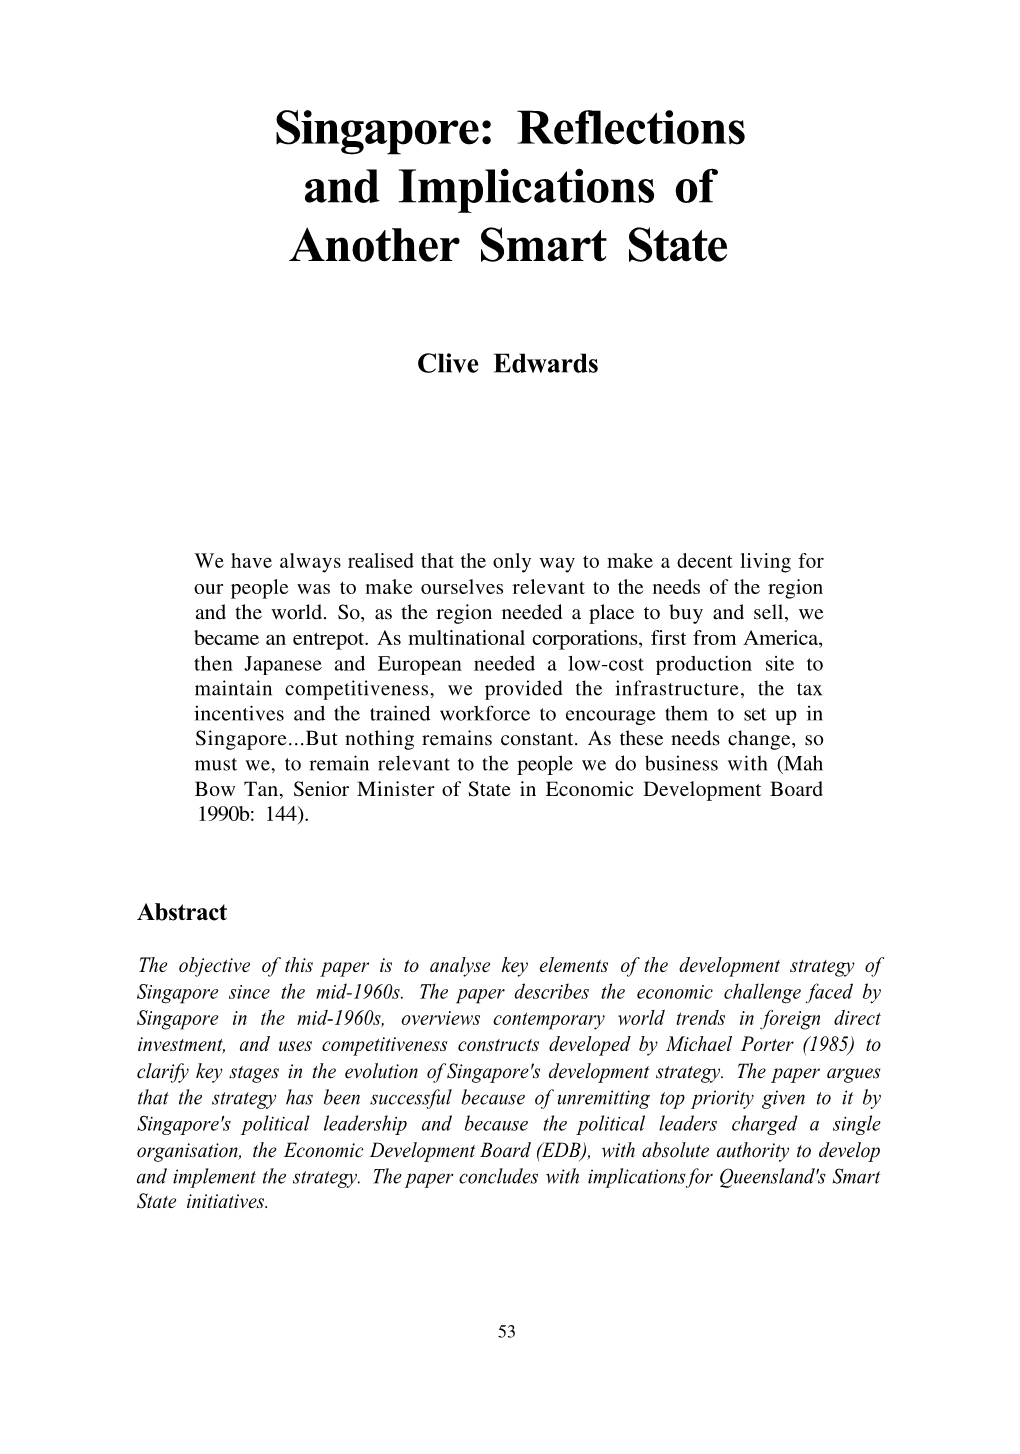 Singapore: Reflections and Implications of Another Smart State